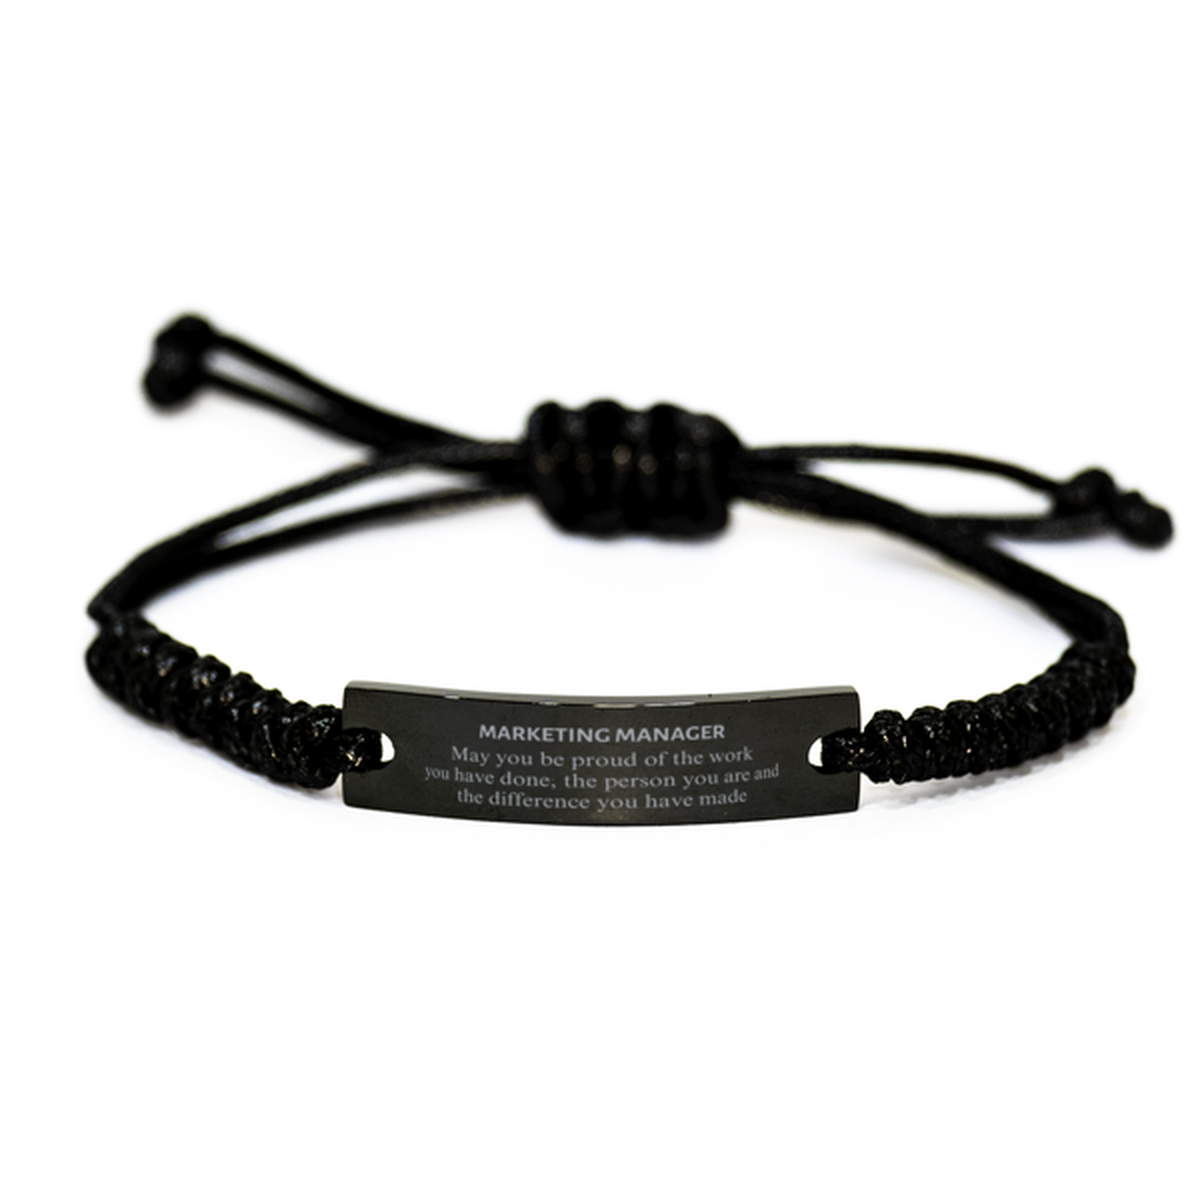 Marketing Manager May you be proud of the work you have done, Retirement Marketing Manager Black Rope Bracelet for Colleague Appreciation Gifts Amazing for Marketing Manager